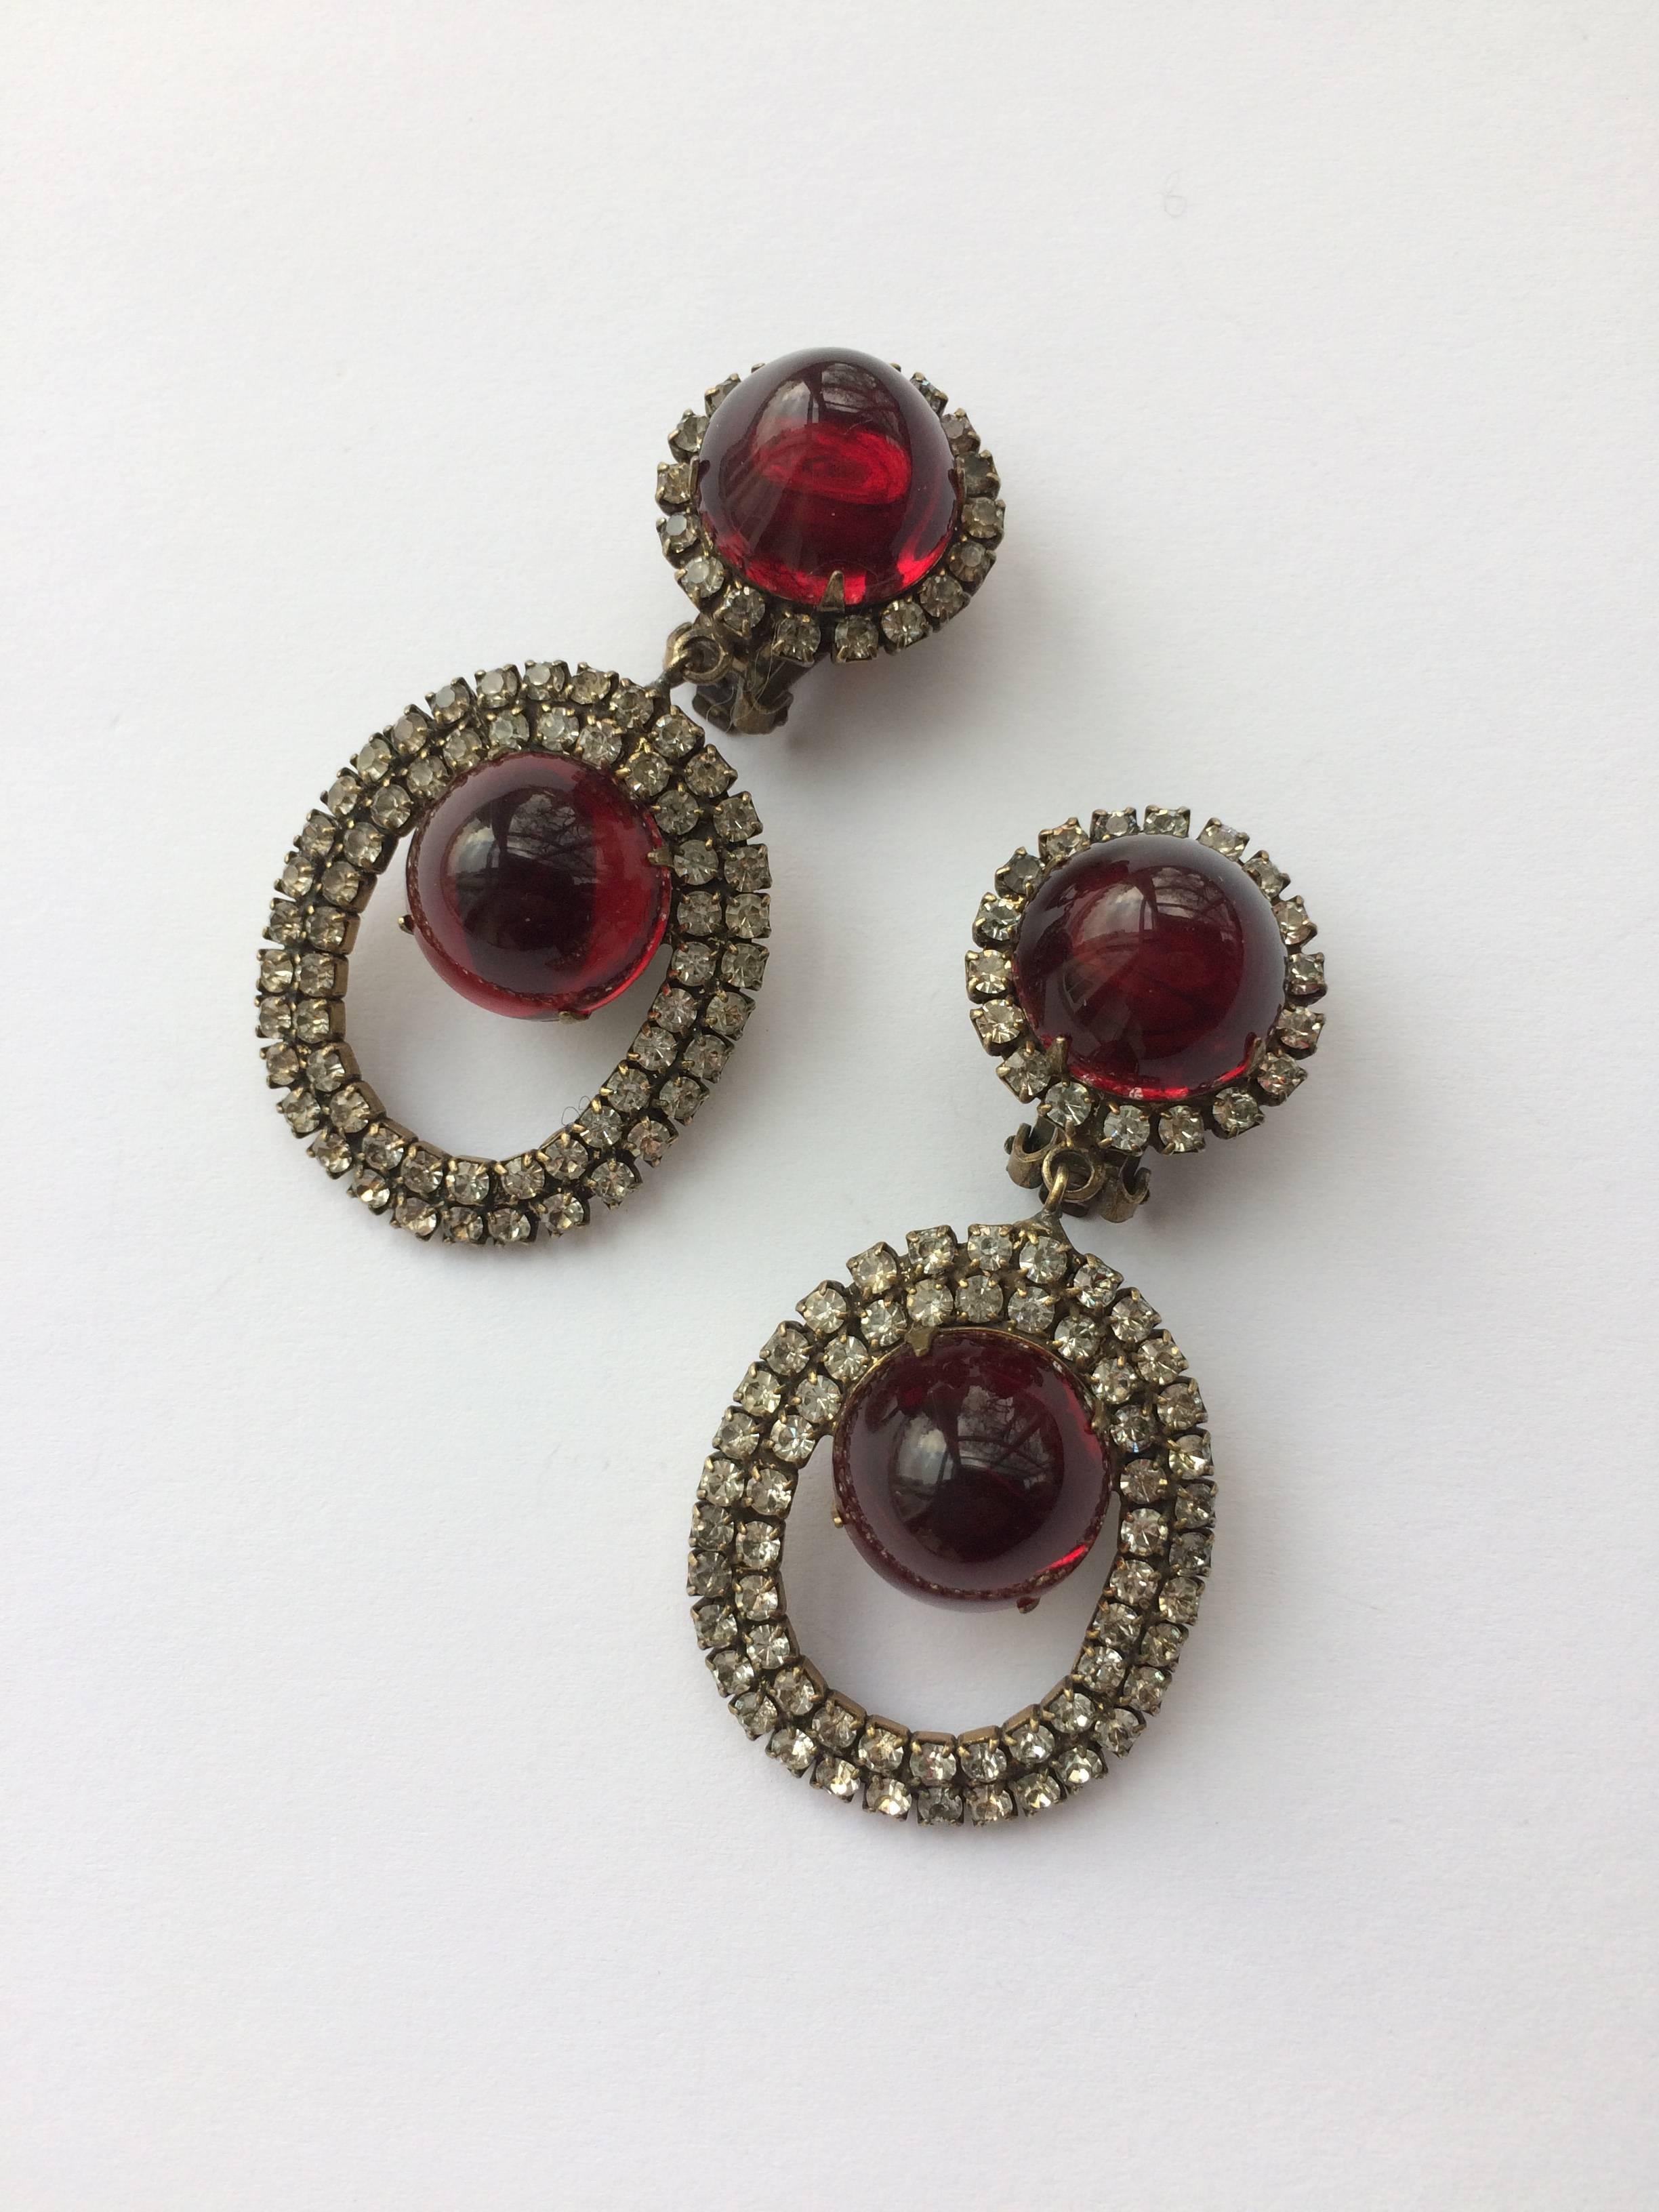 Ruby cabochon and grey paste drop earrings, Kenneth Jay Lane (KJL), USA, 1960s 1